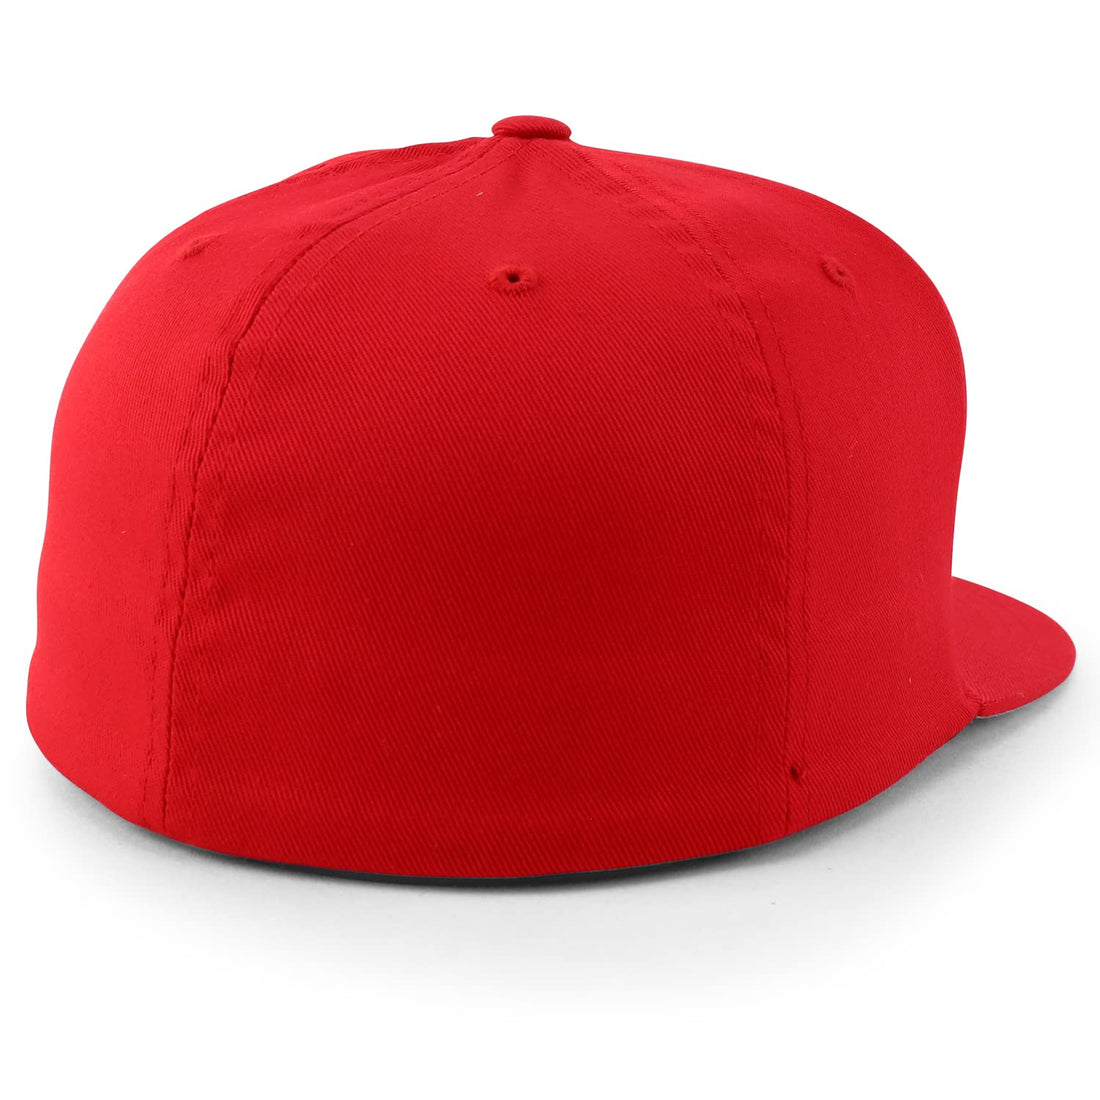 Trendy Apparel Shop 6 Panel Structured Blank Flatbill Fitted Closure Flexfit Cap